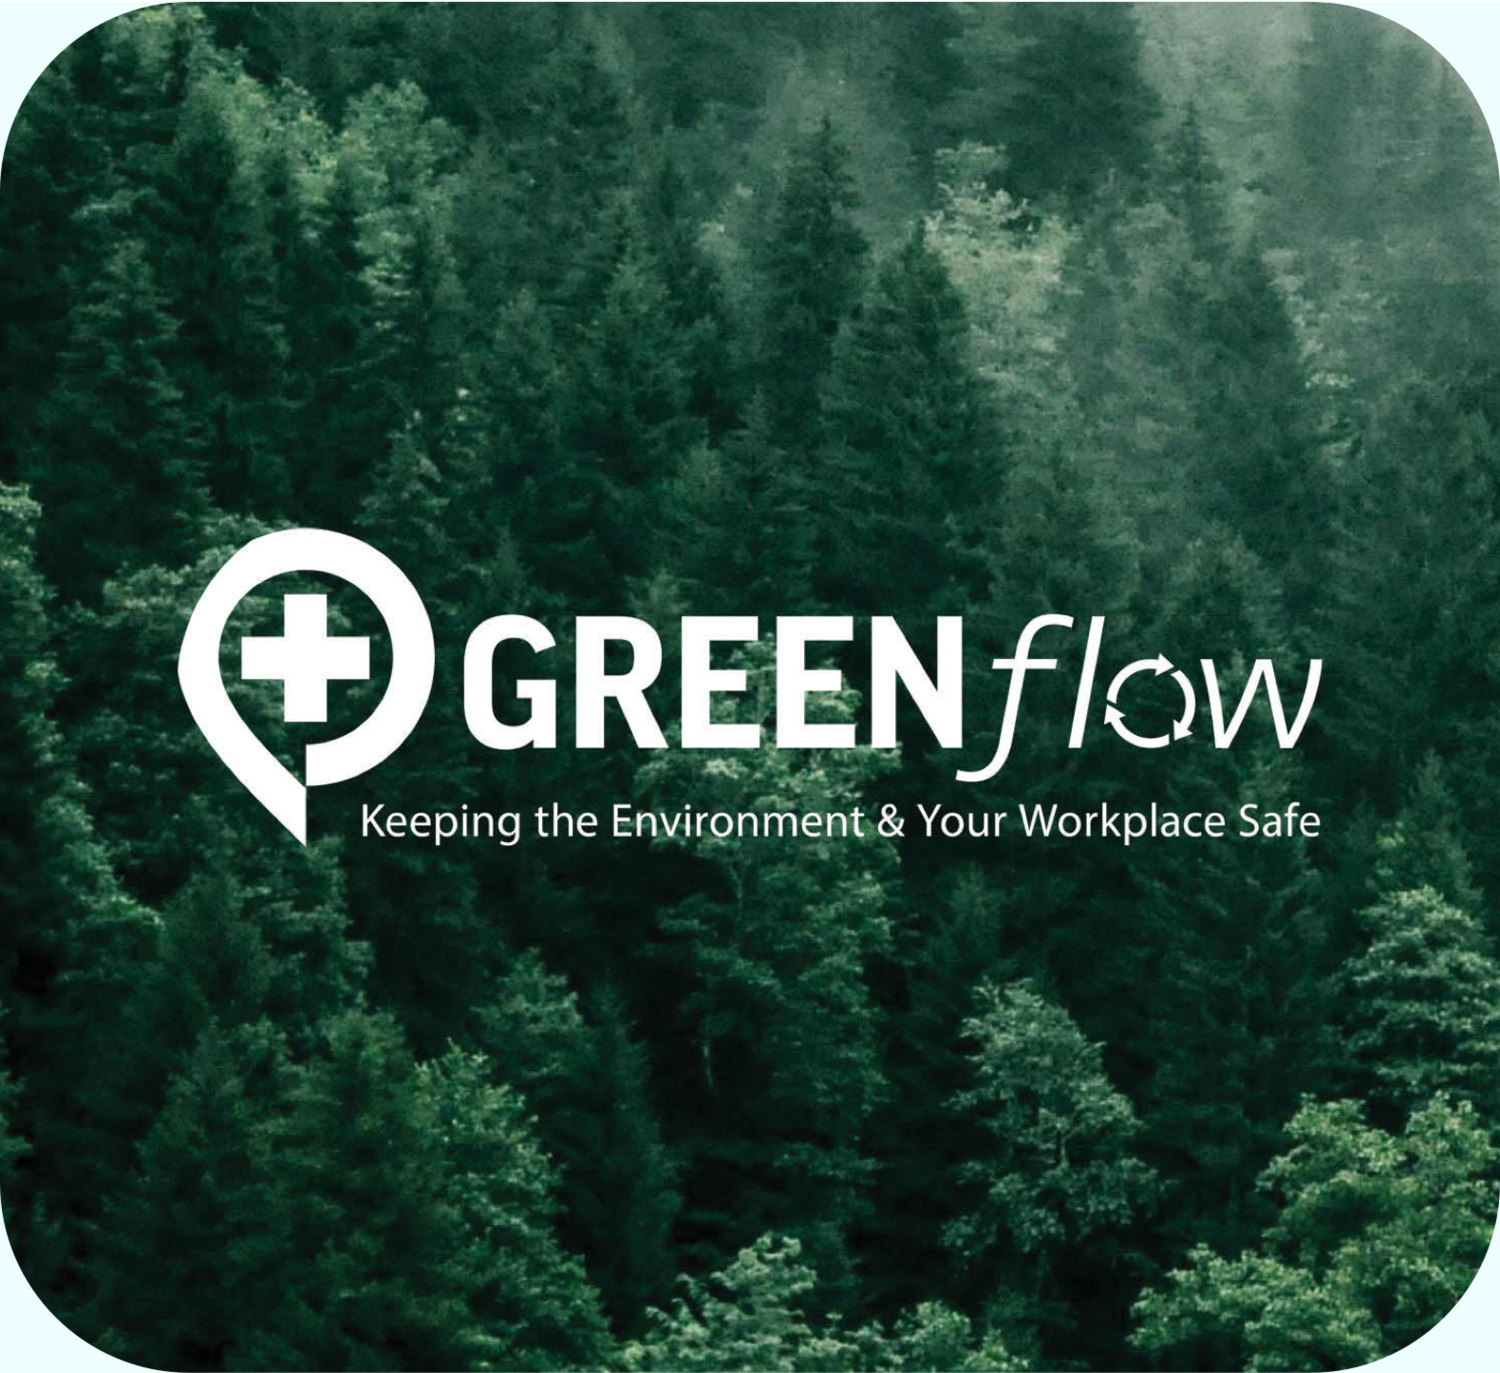 Greenflow logo over a forest